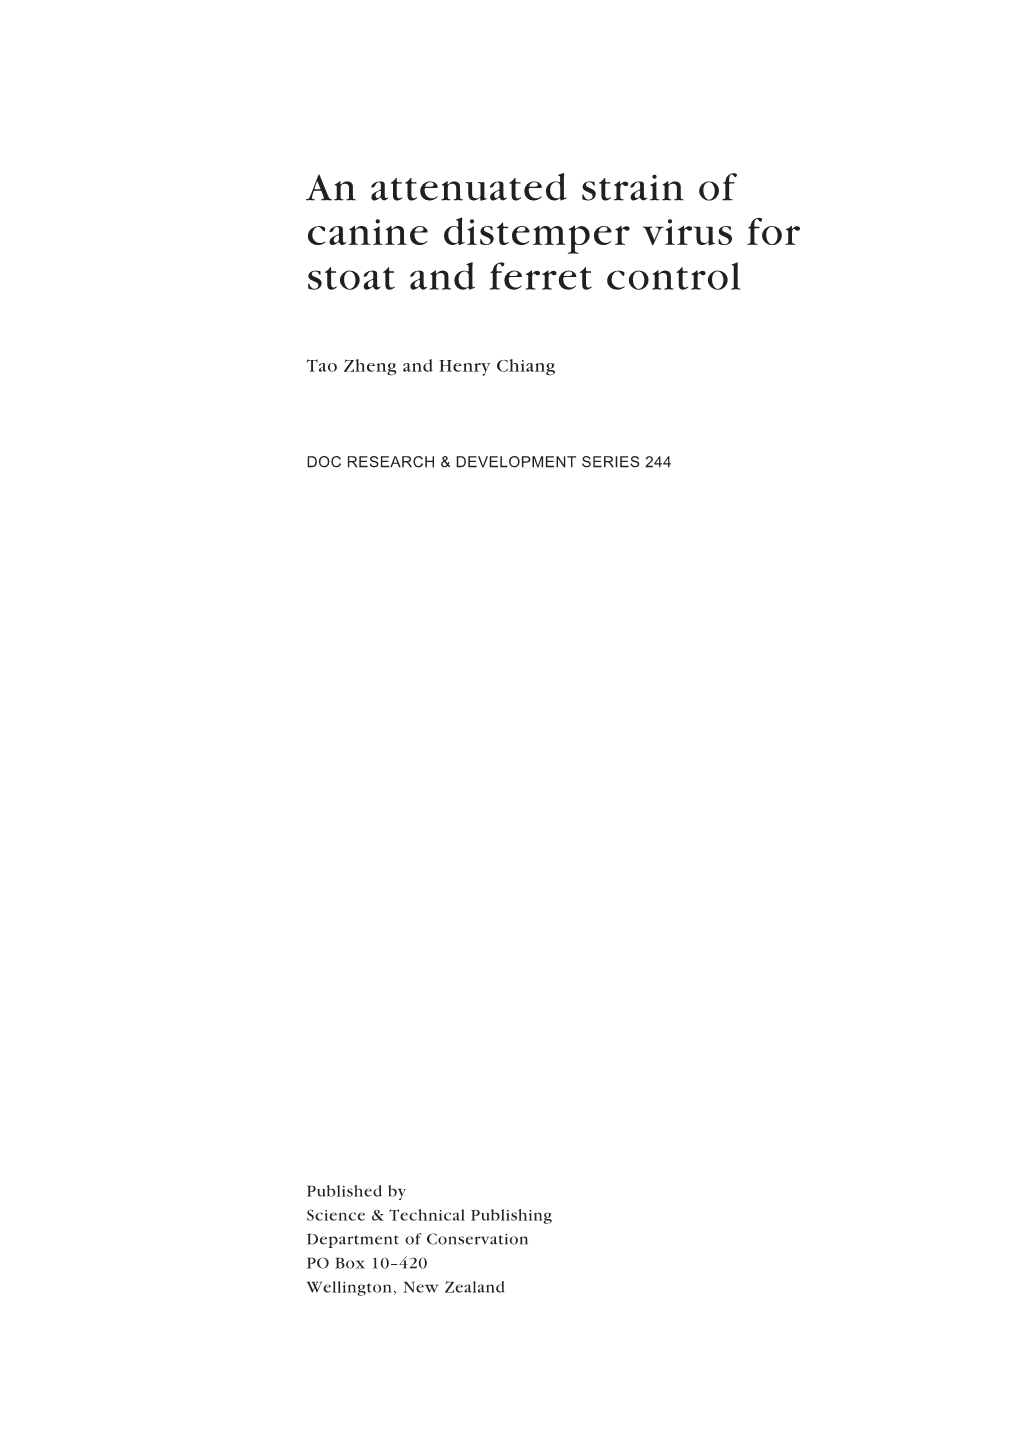 An Attenuated Strain of Canine Distemper Virus for Stoat and Ferret Control